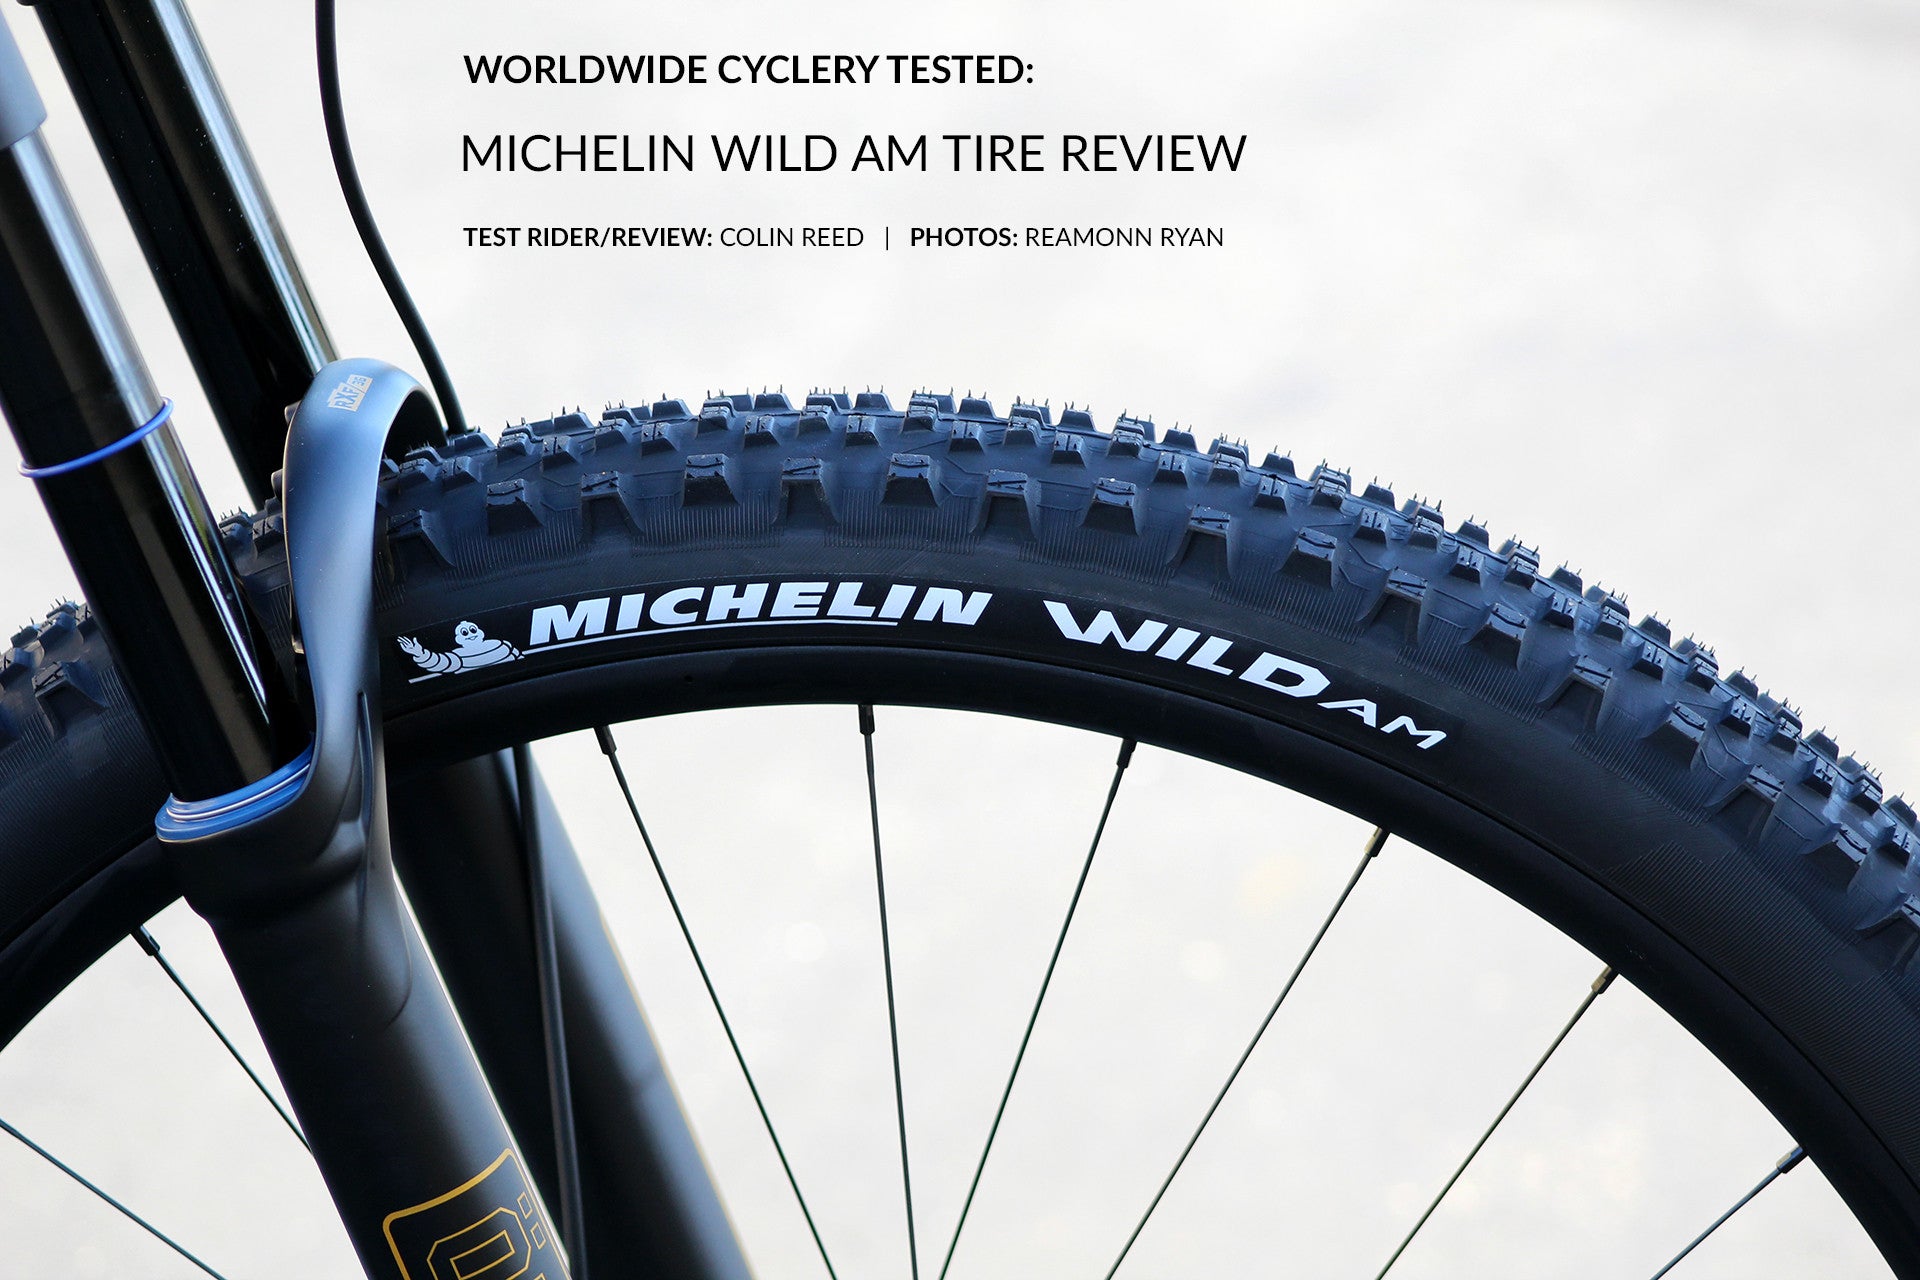 Michelin Wild AM Tire Review: A New All 